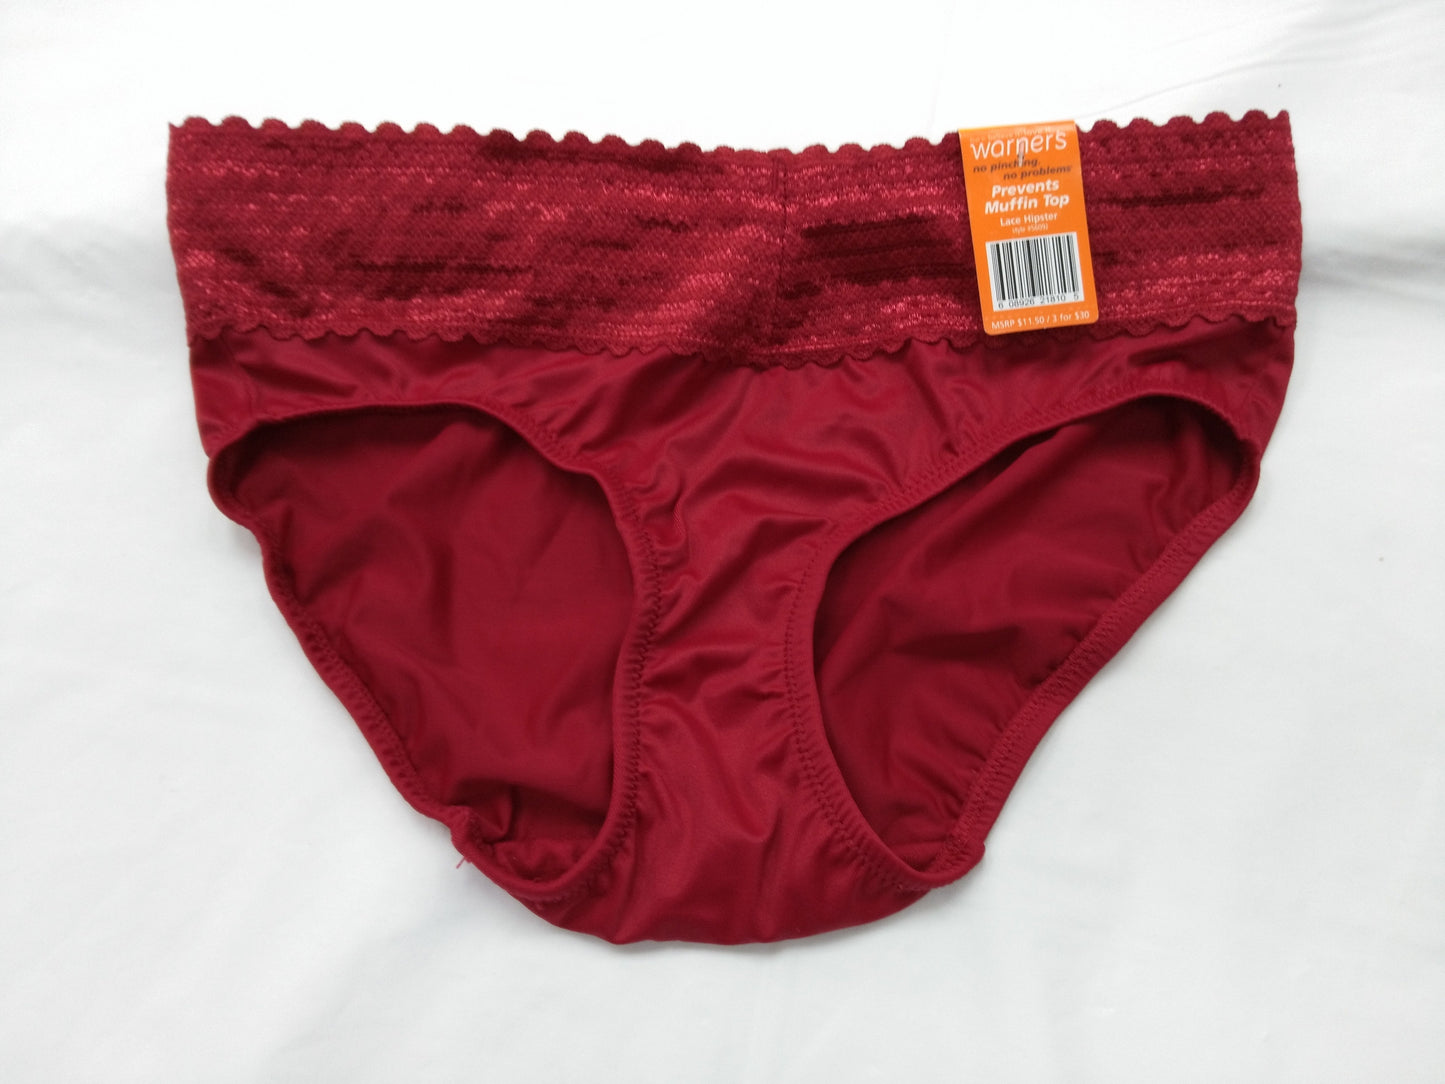 Warner's Women's No Pinching No Problems Lace Hipster, Crimson Red, Small